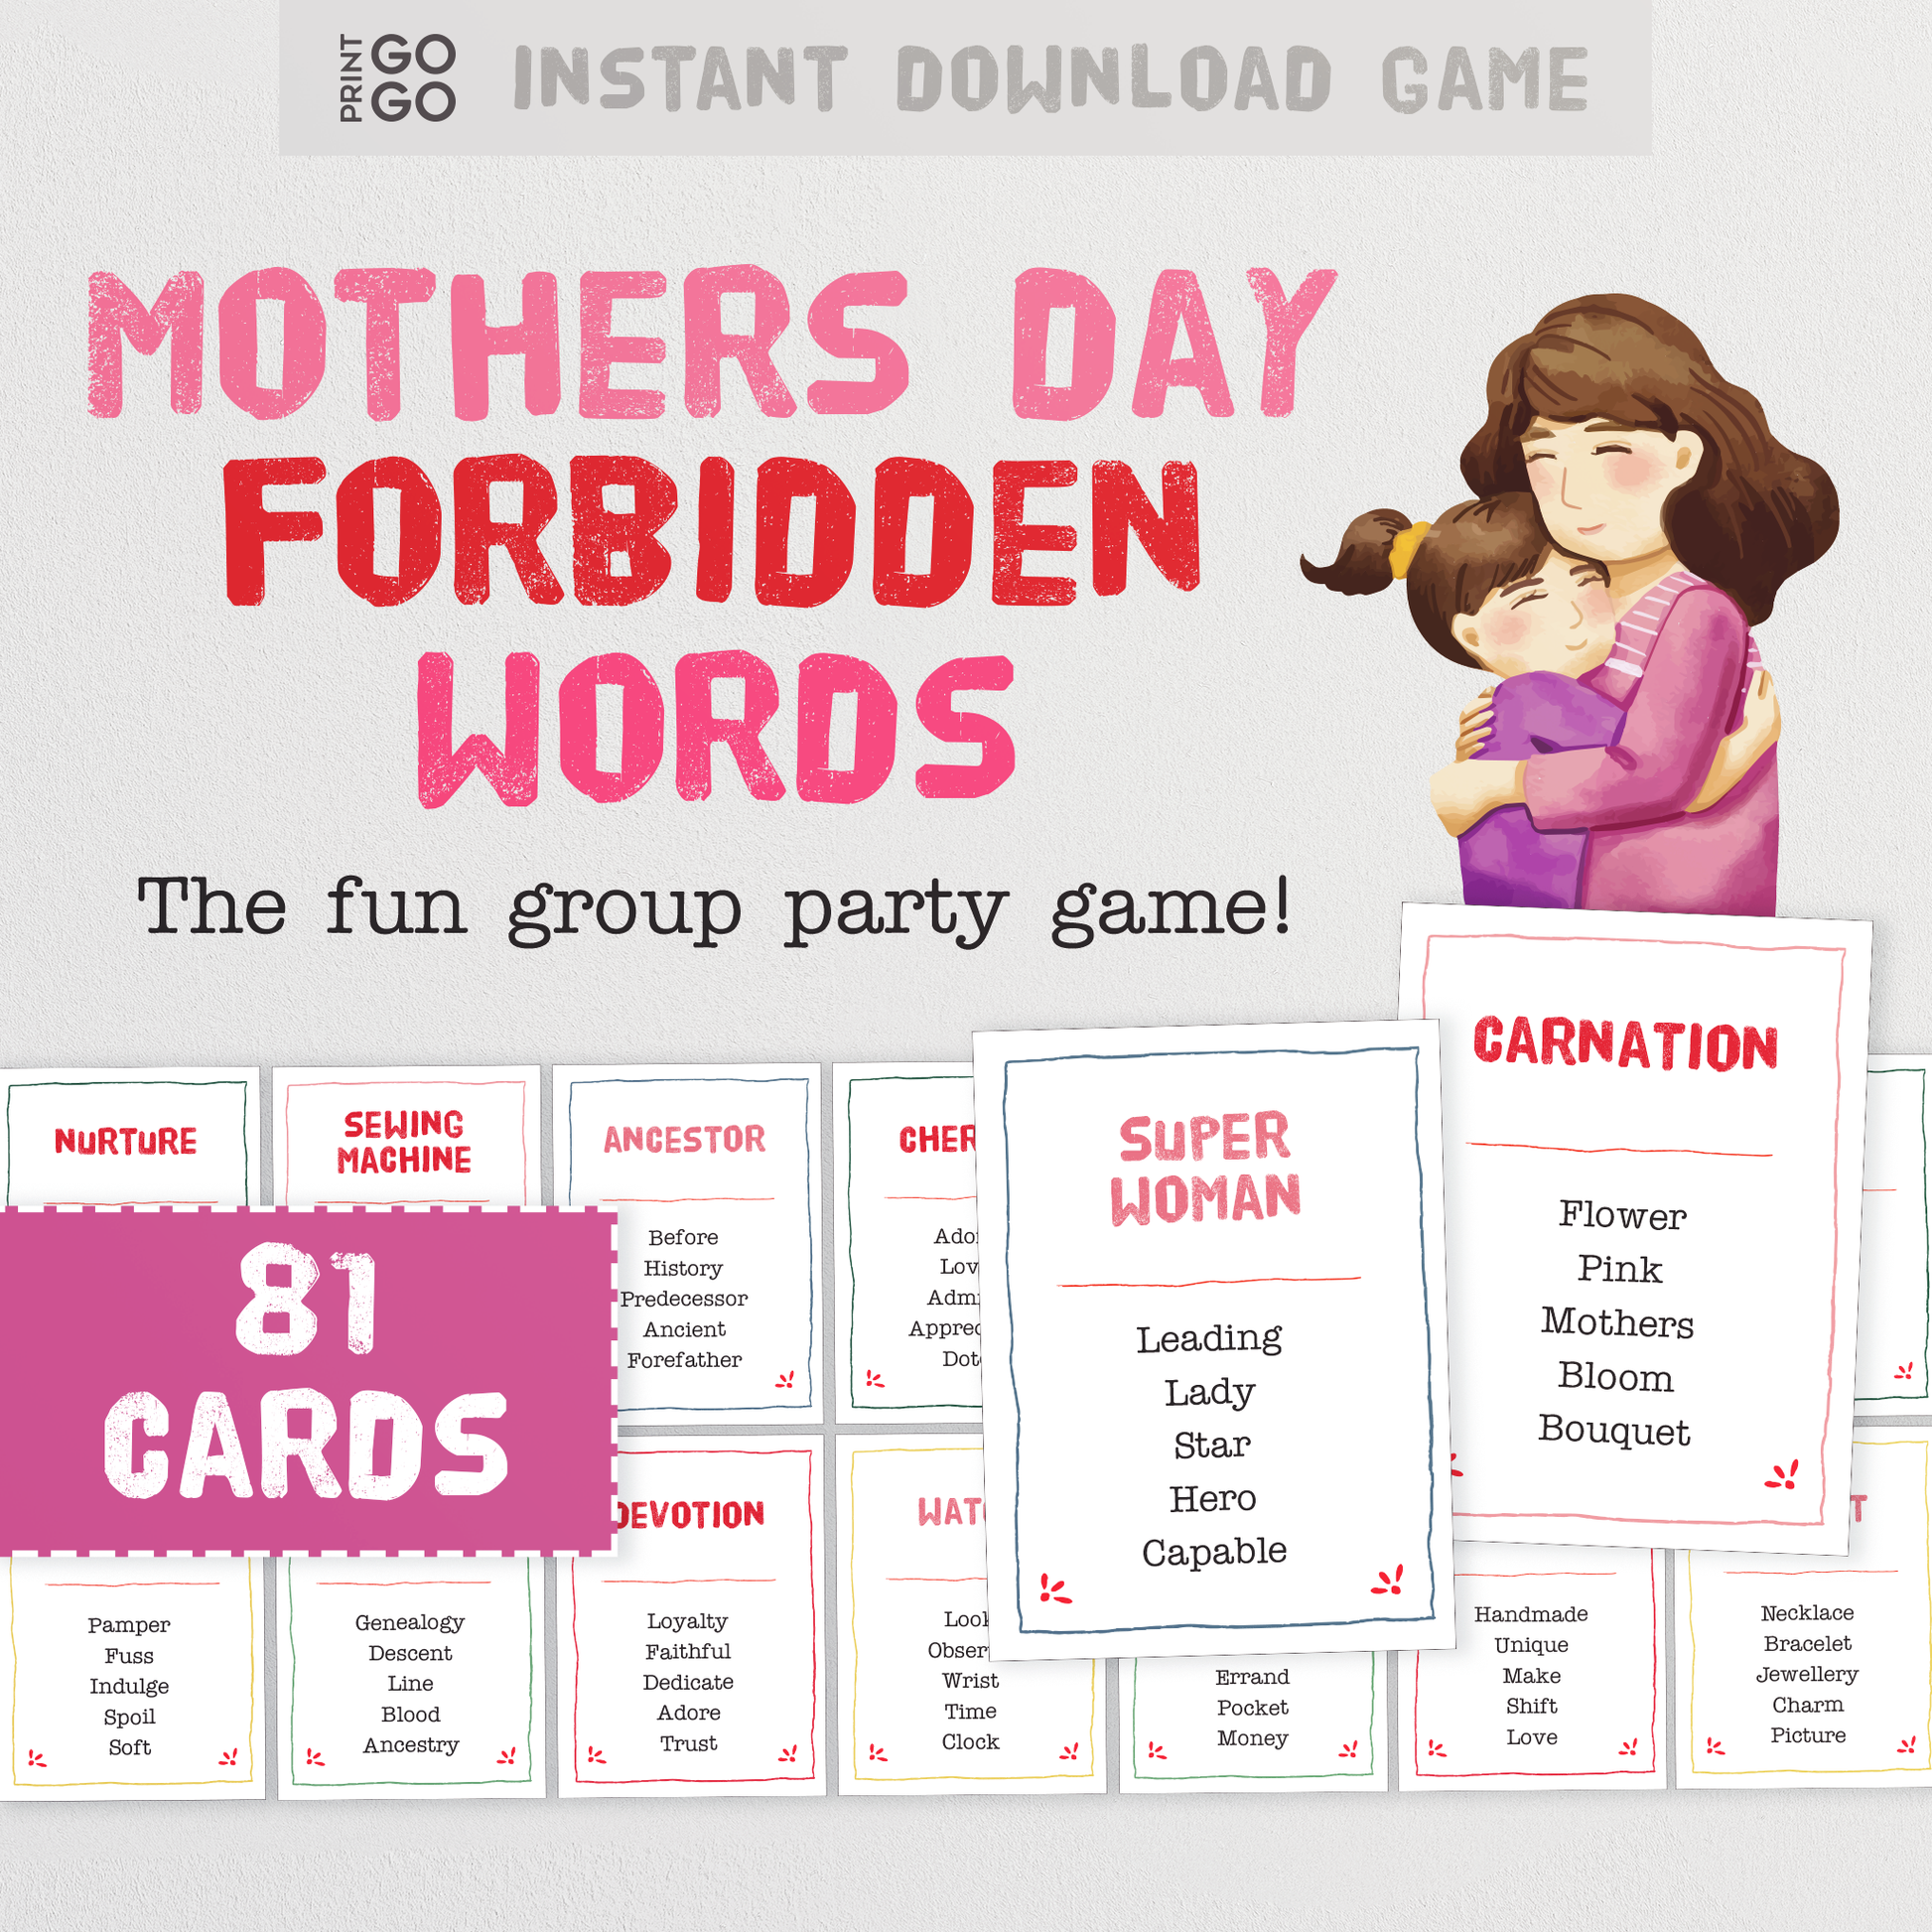 Mothers Day Forbidden Words - The Fun Quick Thinking Group Party Game